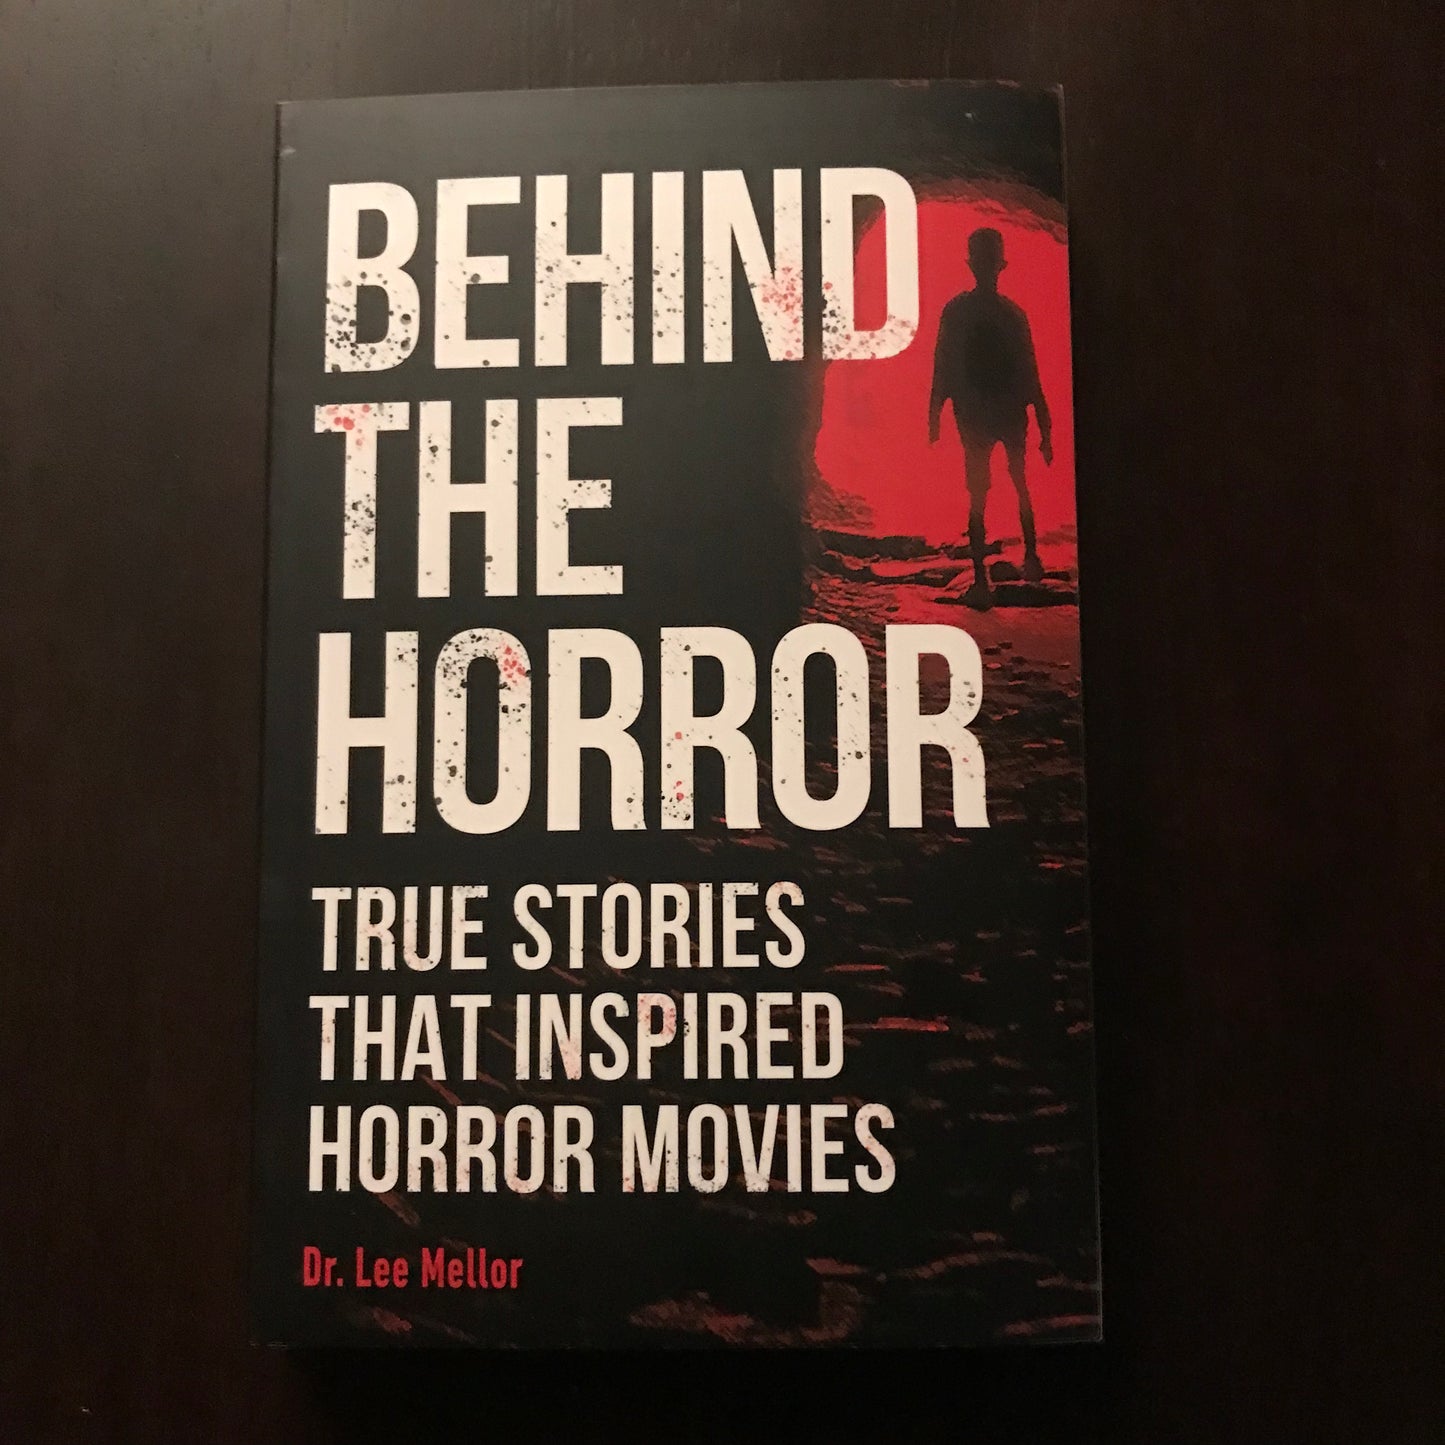 BEHIND THE HORROR: TRUE STORIES THAT INSPIRED HORROR MOVIES SC New